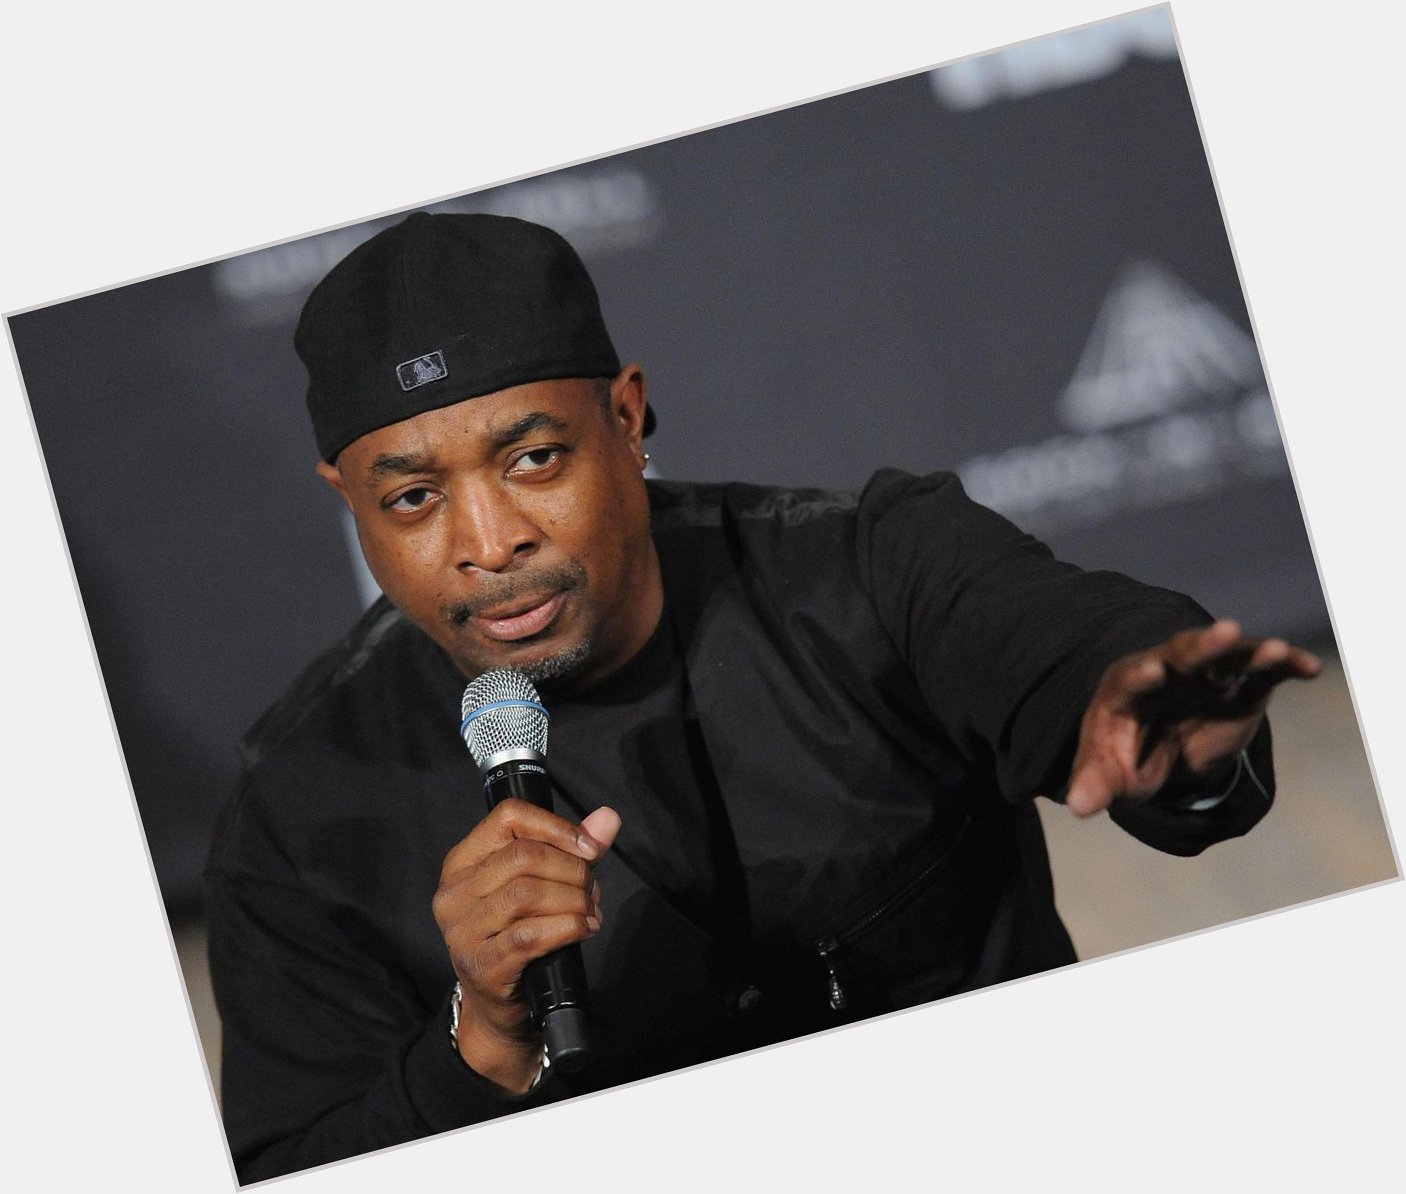 Happy Birthday to Chuck D, who turns 55 today! 